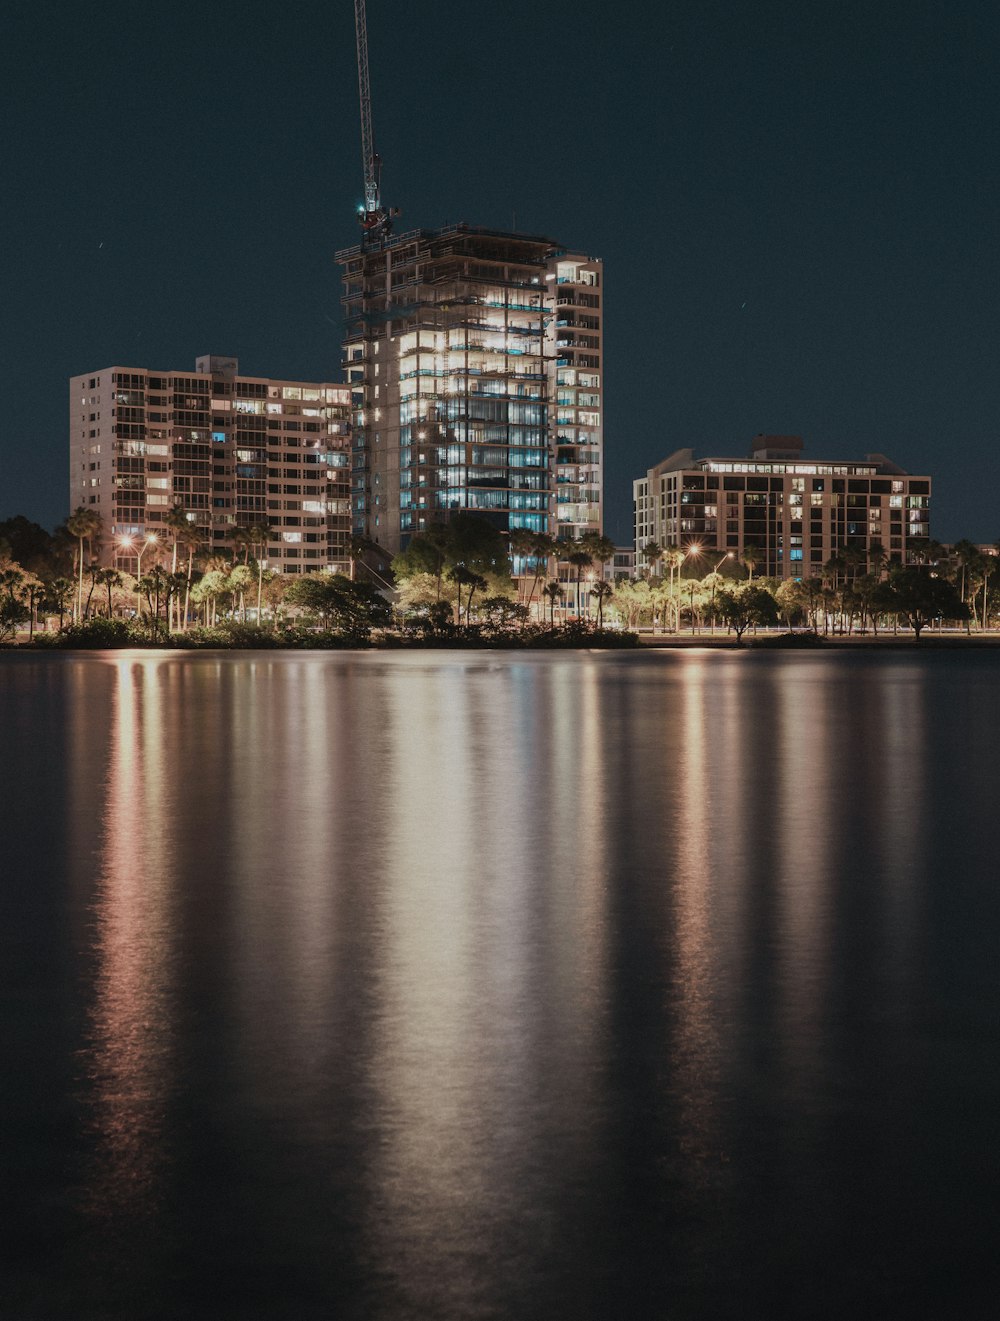 city skyline across body of water during night time